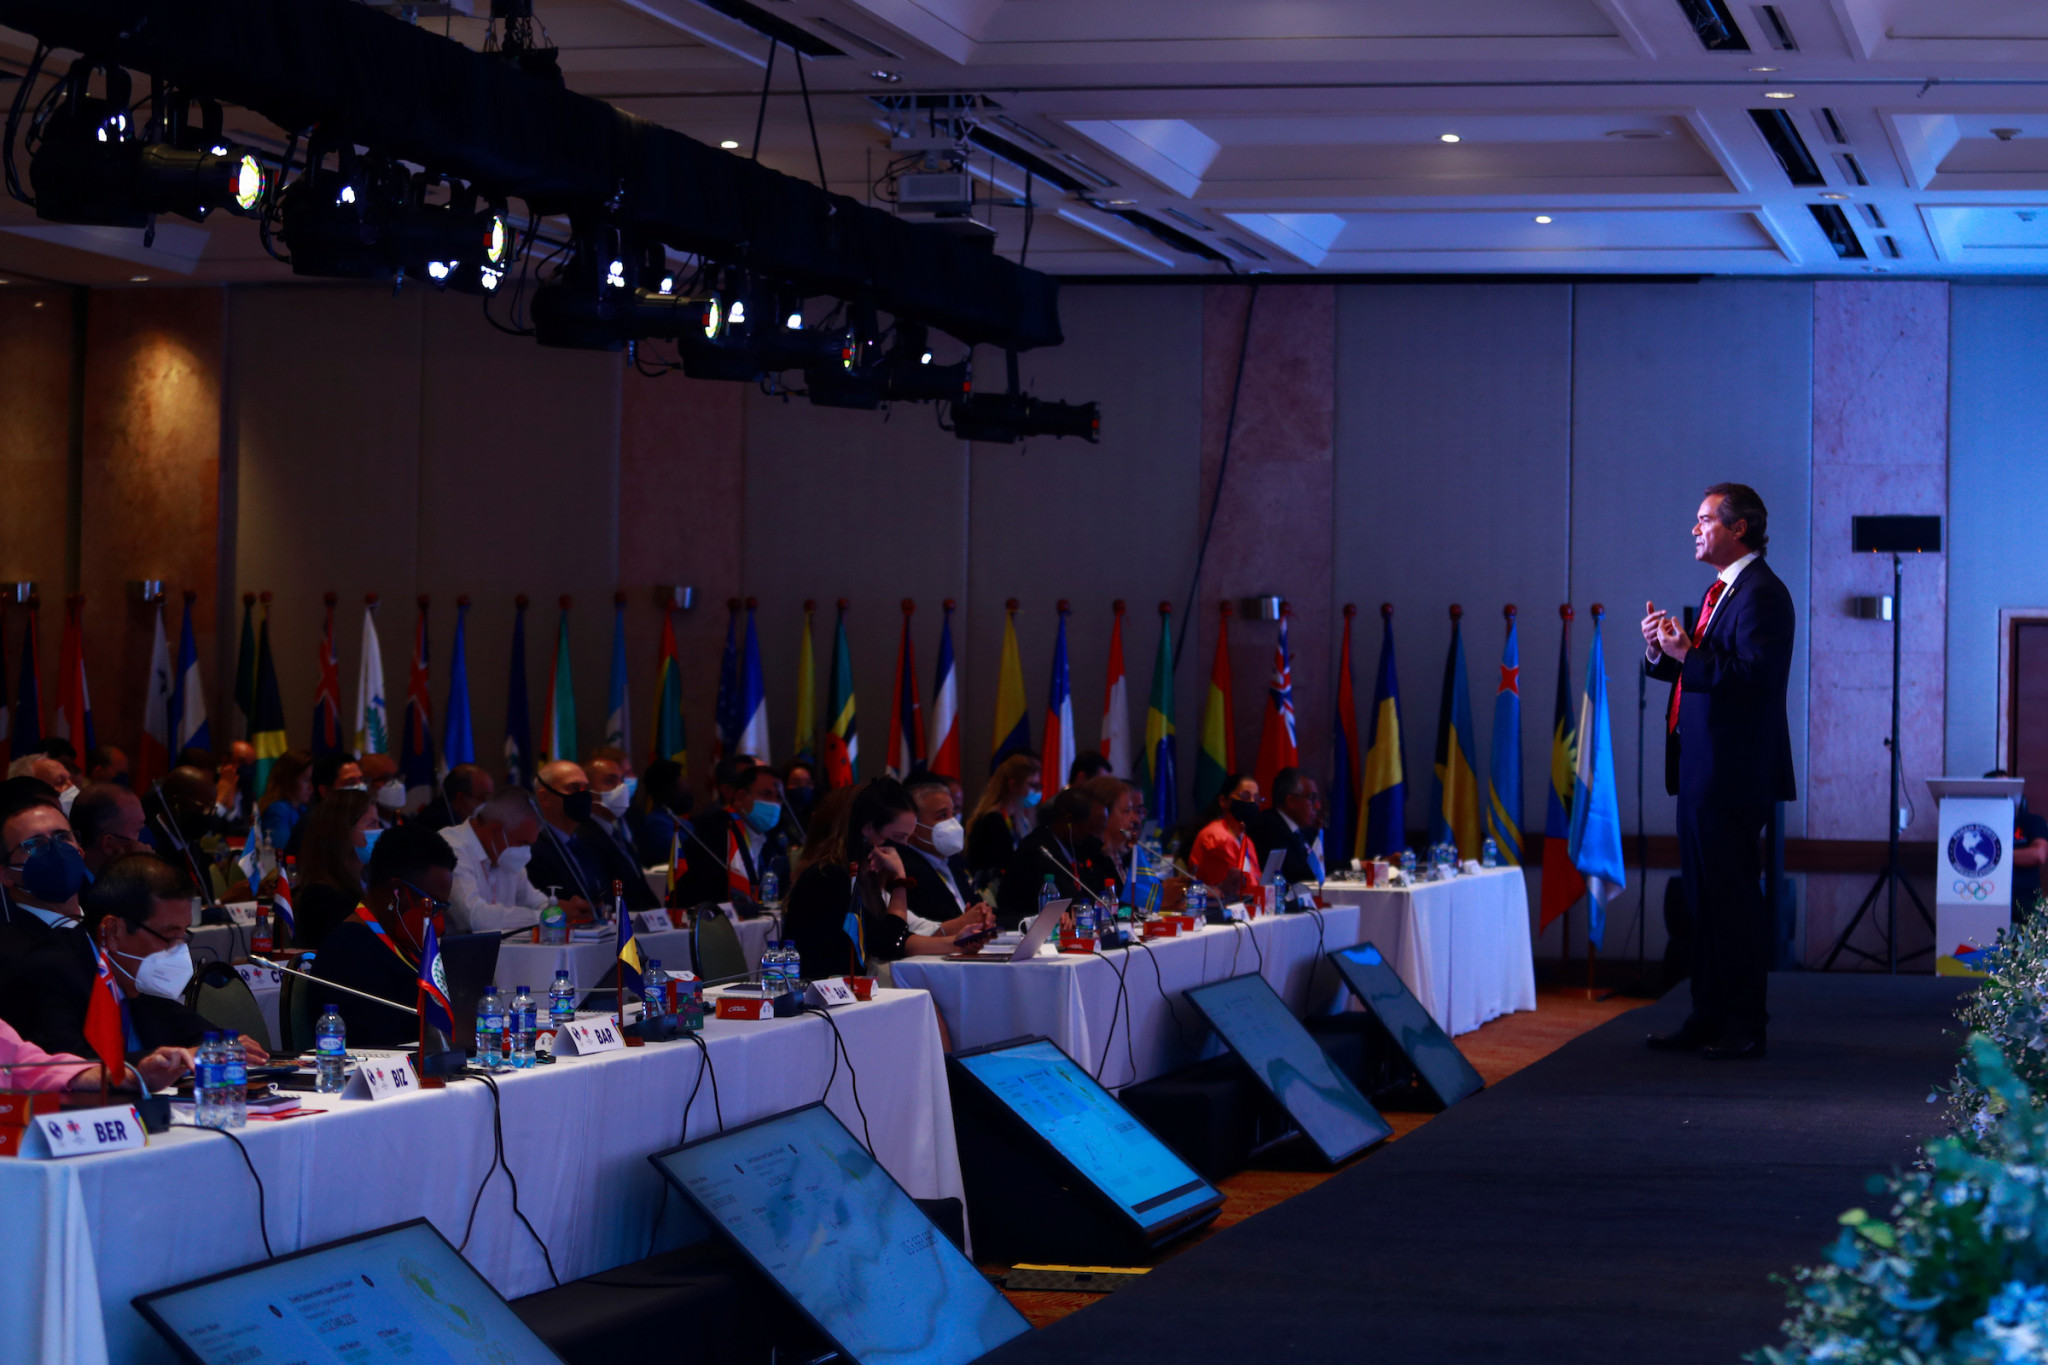 Neven Ilic addressed delegates at the Panam Sports General Assembly in Cali ©Agencia.XpressMedia